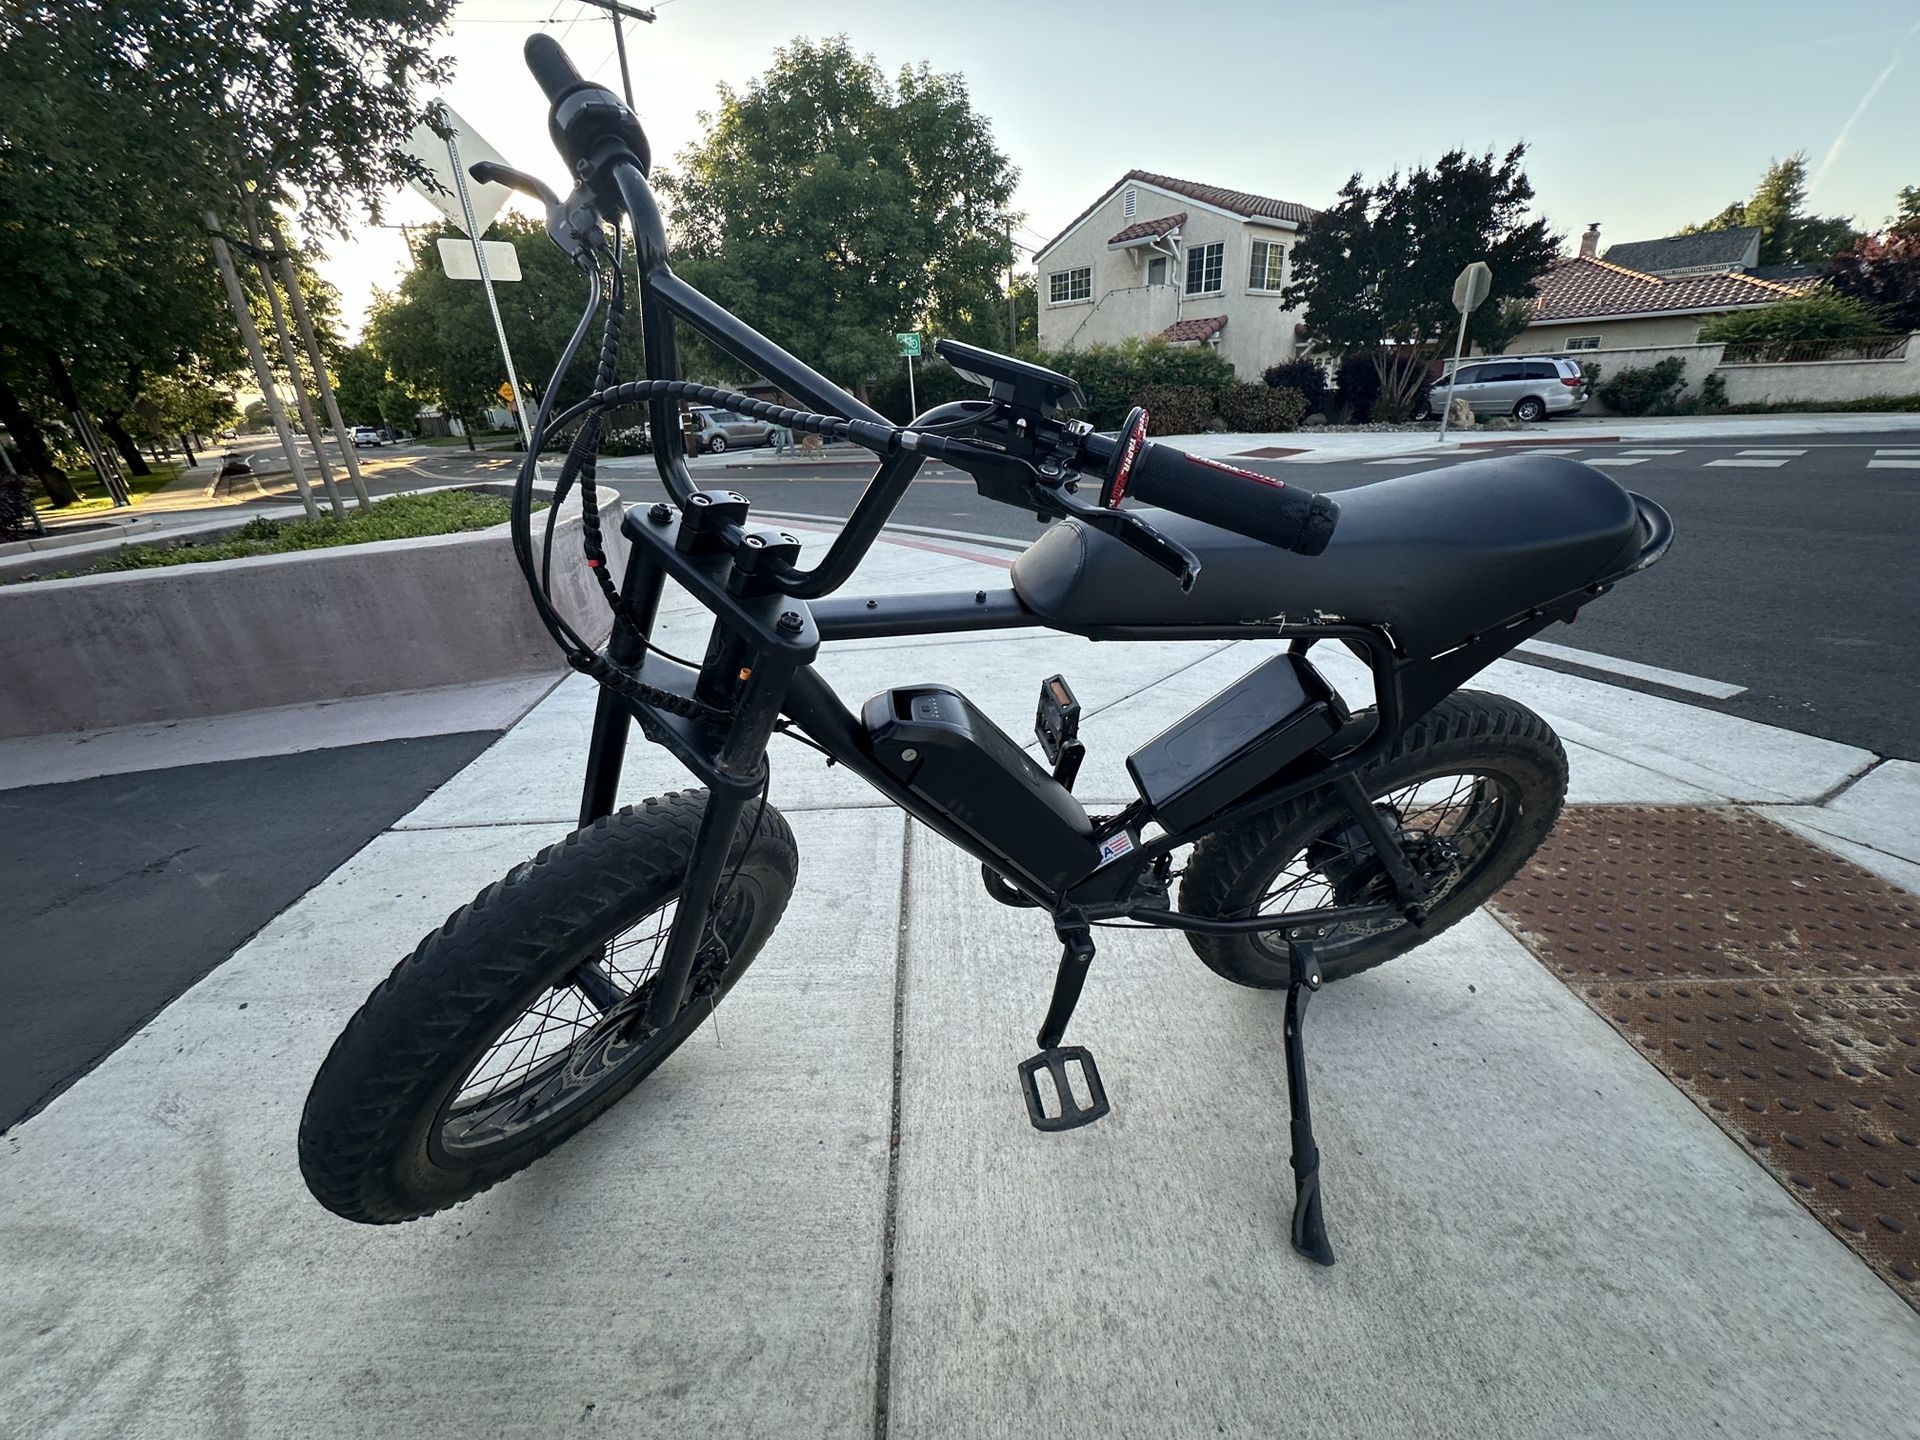 Macfox X1 280$ In Upgrades 1,000 Brand New Only 68 Miles 